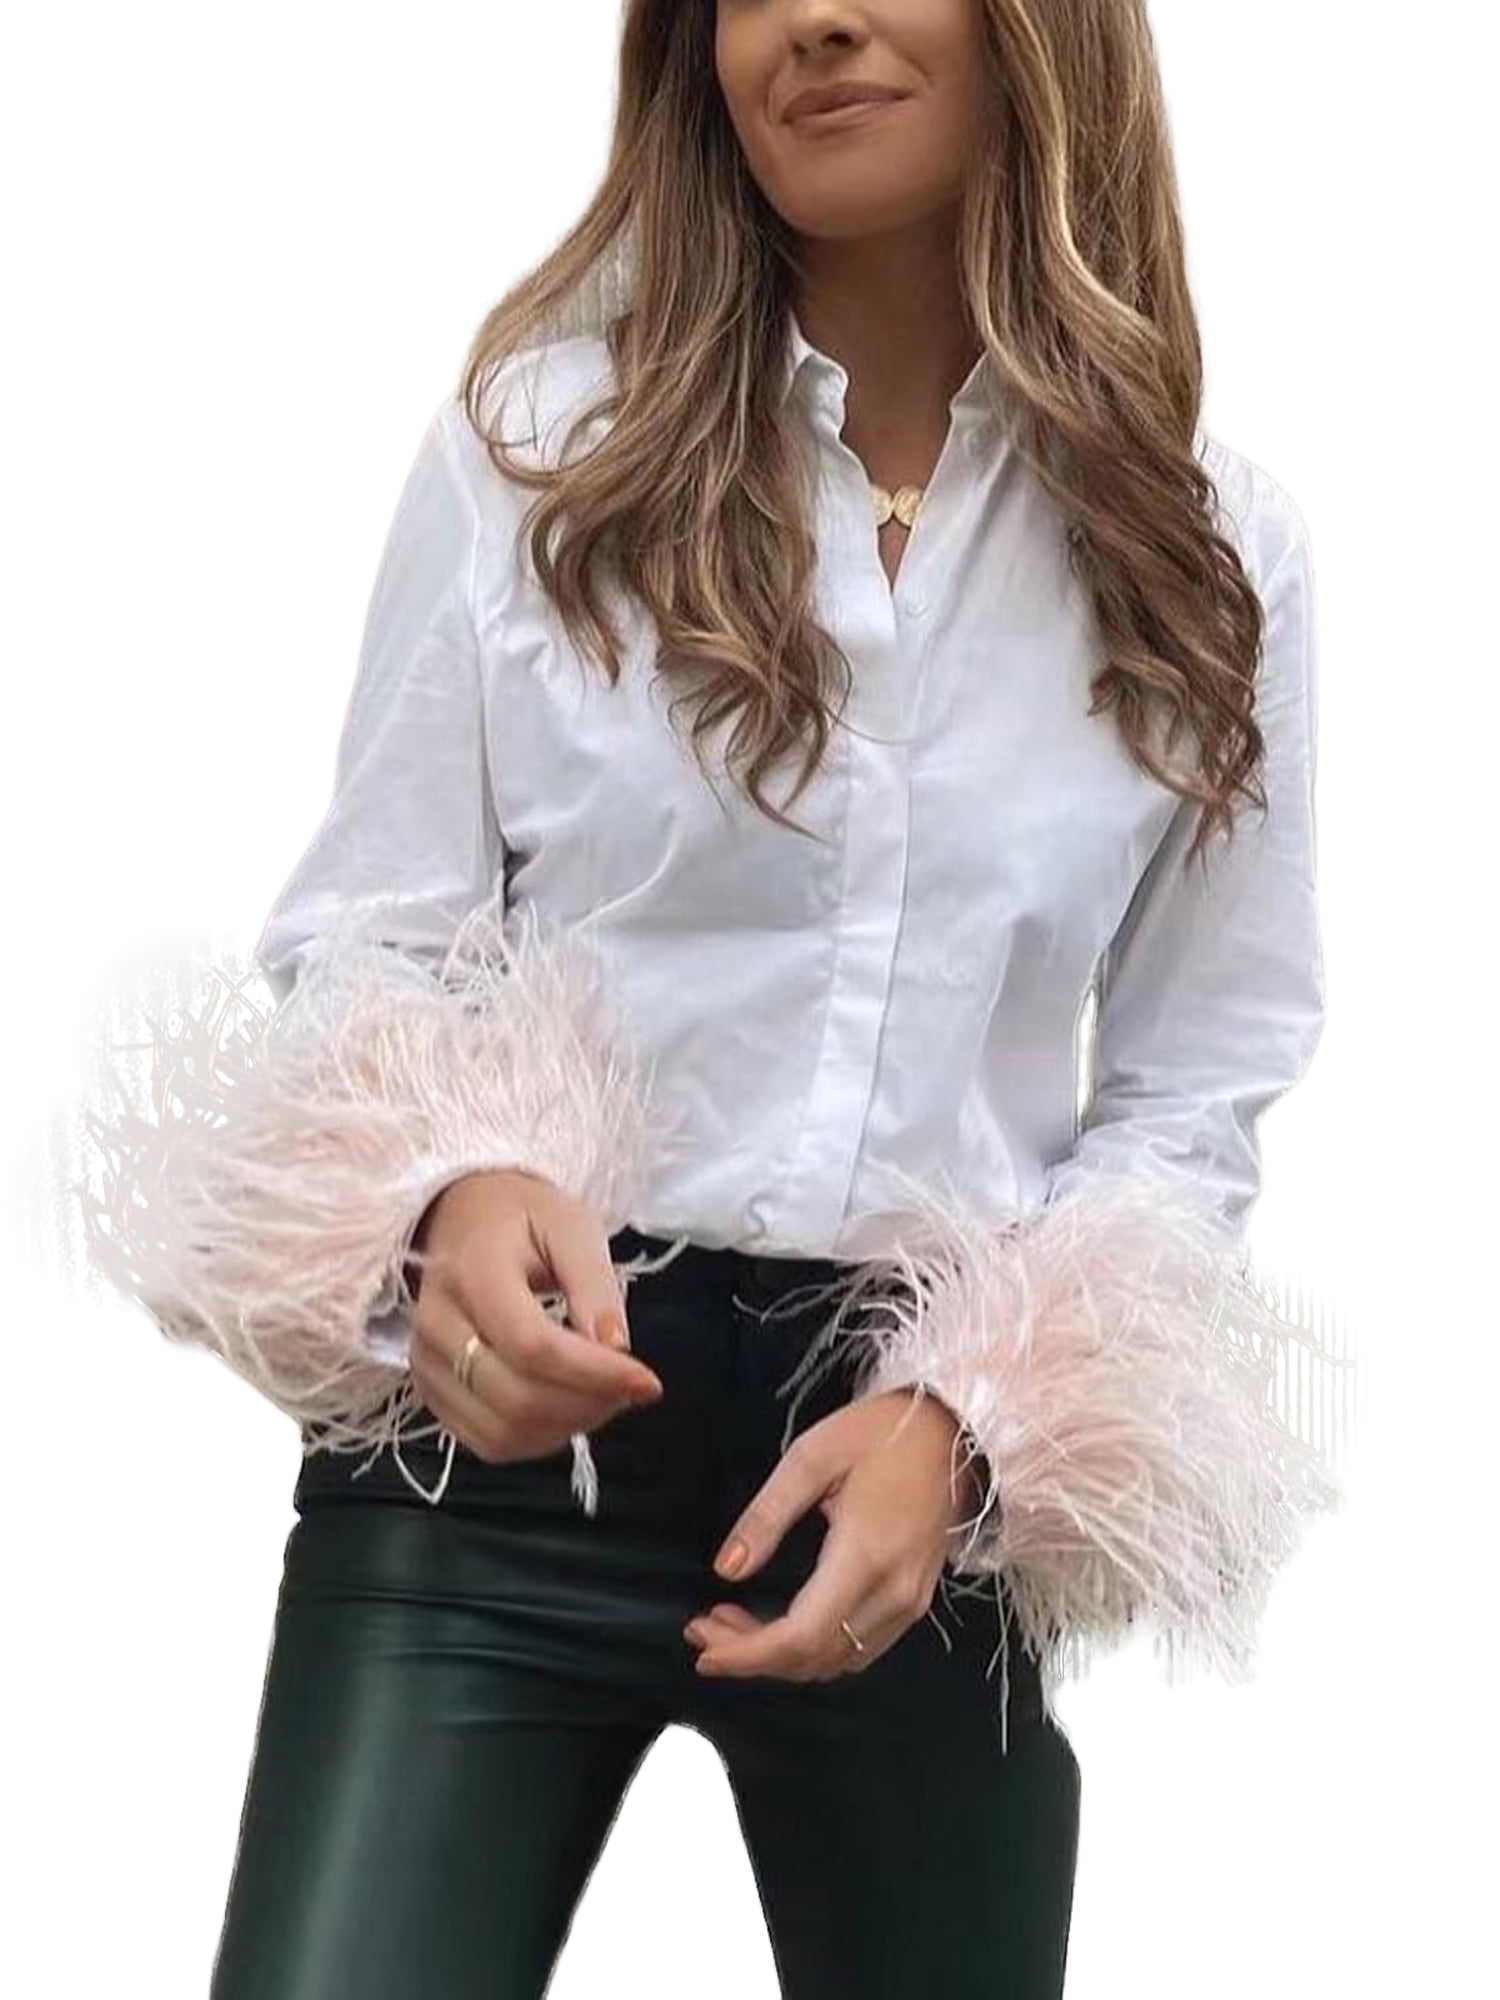 Feather Trim Sweater Top - Style Me Boutique